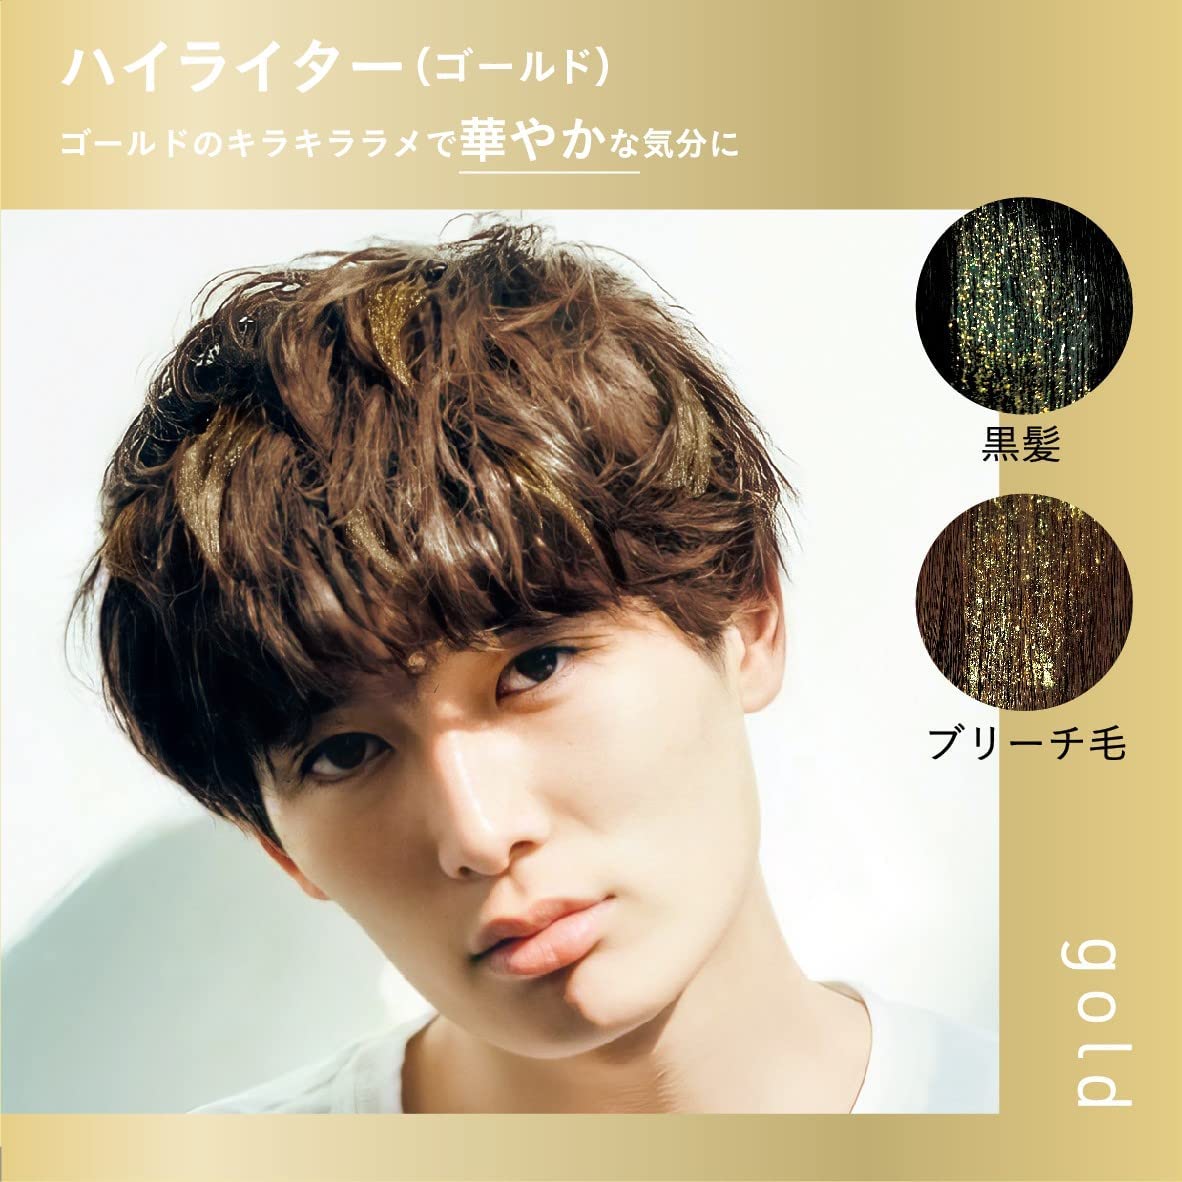 Ichikami The Premium Hair Styling Palette 50g - Harajuku Culture Japan - Japanease Products Store Beauty and Stationery